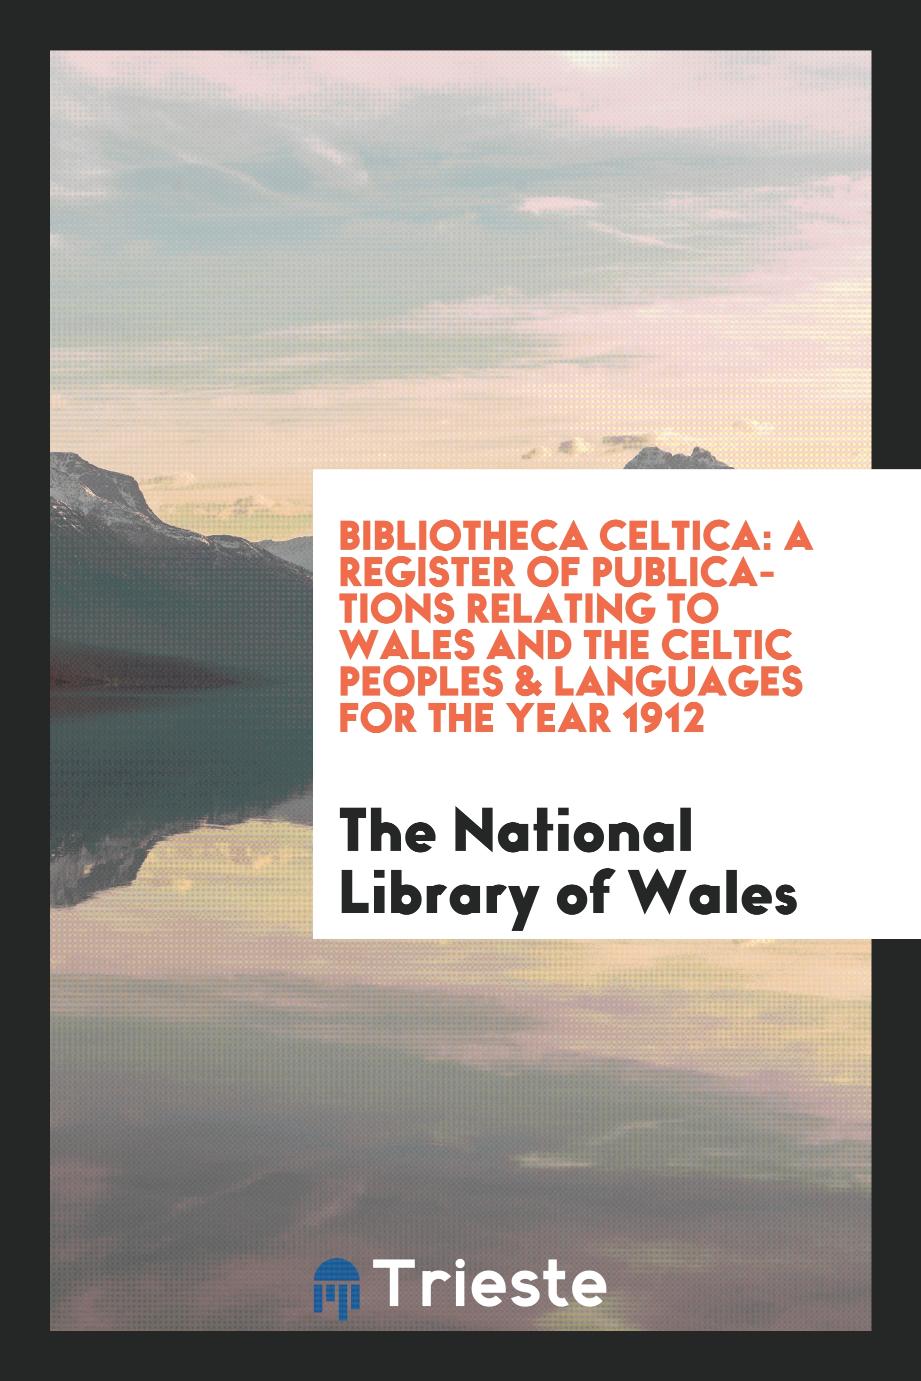 Bibliotheca celtica: a register of publications relating to Wales and the Celtic peoples & languages for the year 1912